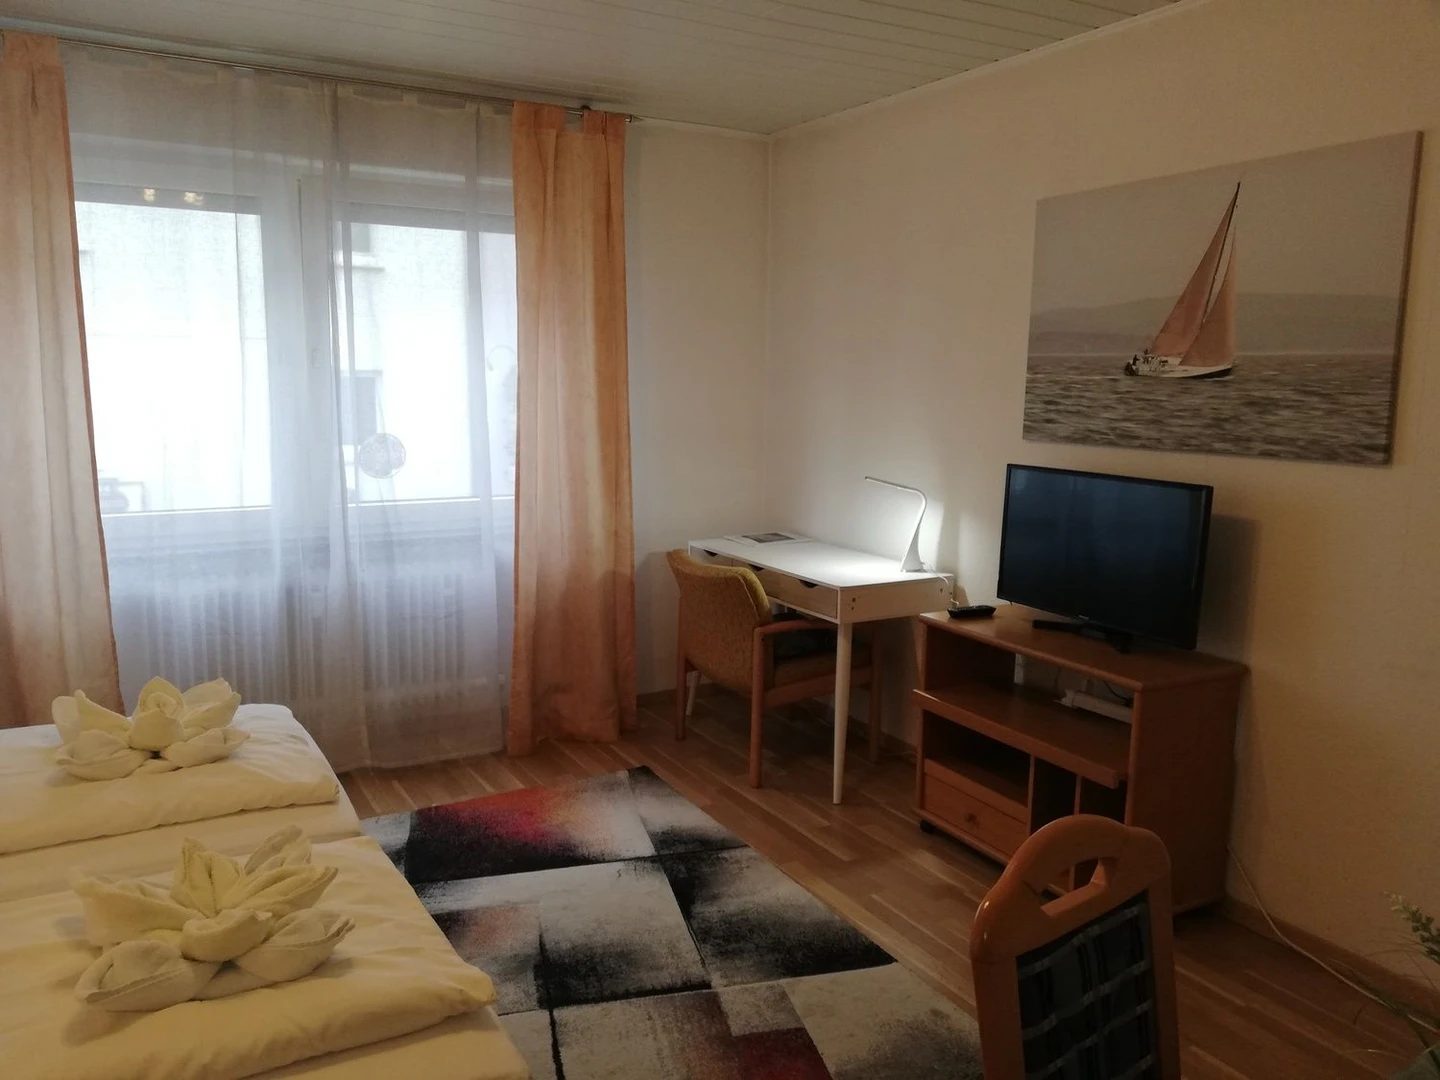 Room for rent with double bed Darmstadt